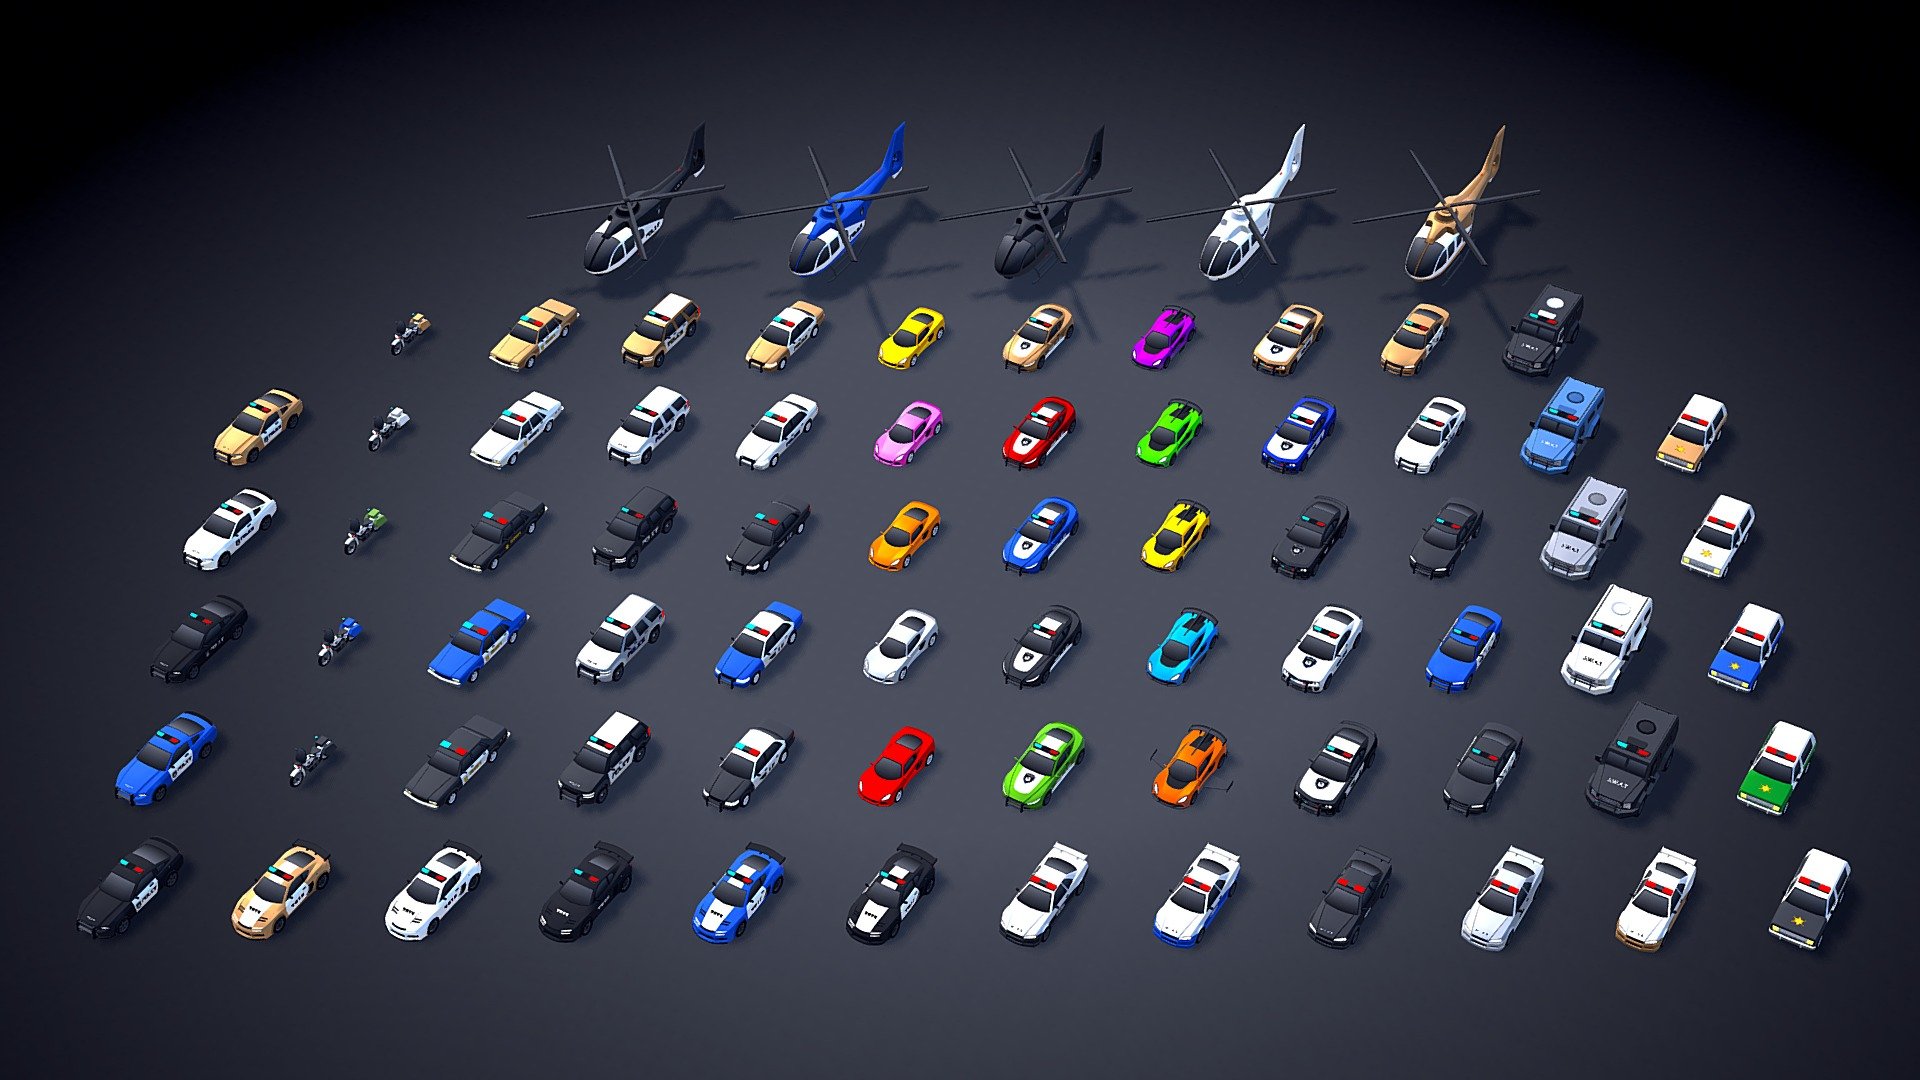 This is the (free) June update of my asset called ARCADE: Ultimate Vehicles Pack. This update will be launched on June 3rd. Available in Unity3D (in the Unity Asset Store) and Sketchfab! (FBX + UNITY Files included).

The update includes 3 new vehicles (racing cars, stunt vehicles, and police cars). Moreover, I updated all police vehicles with new visual enhancements. Zoom-in and check it!

Best regards, Mena 3d model